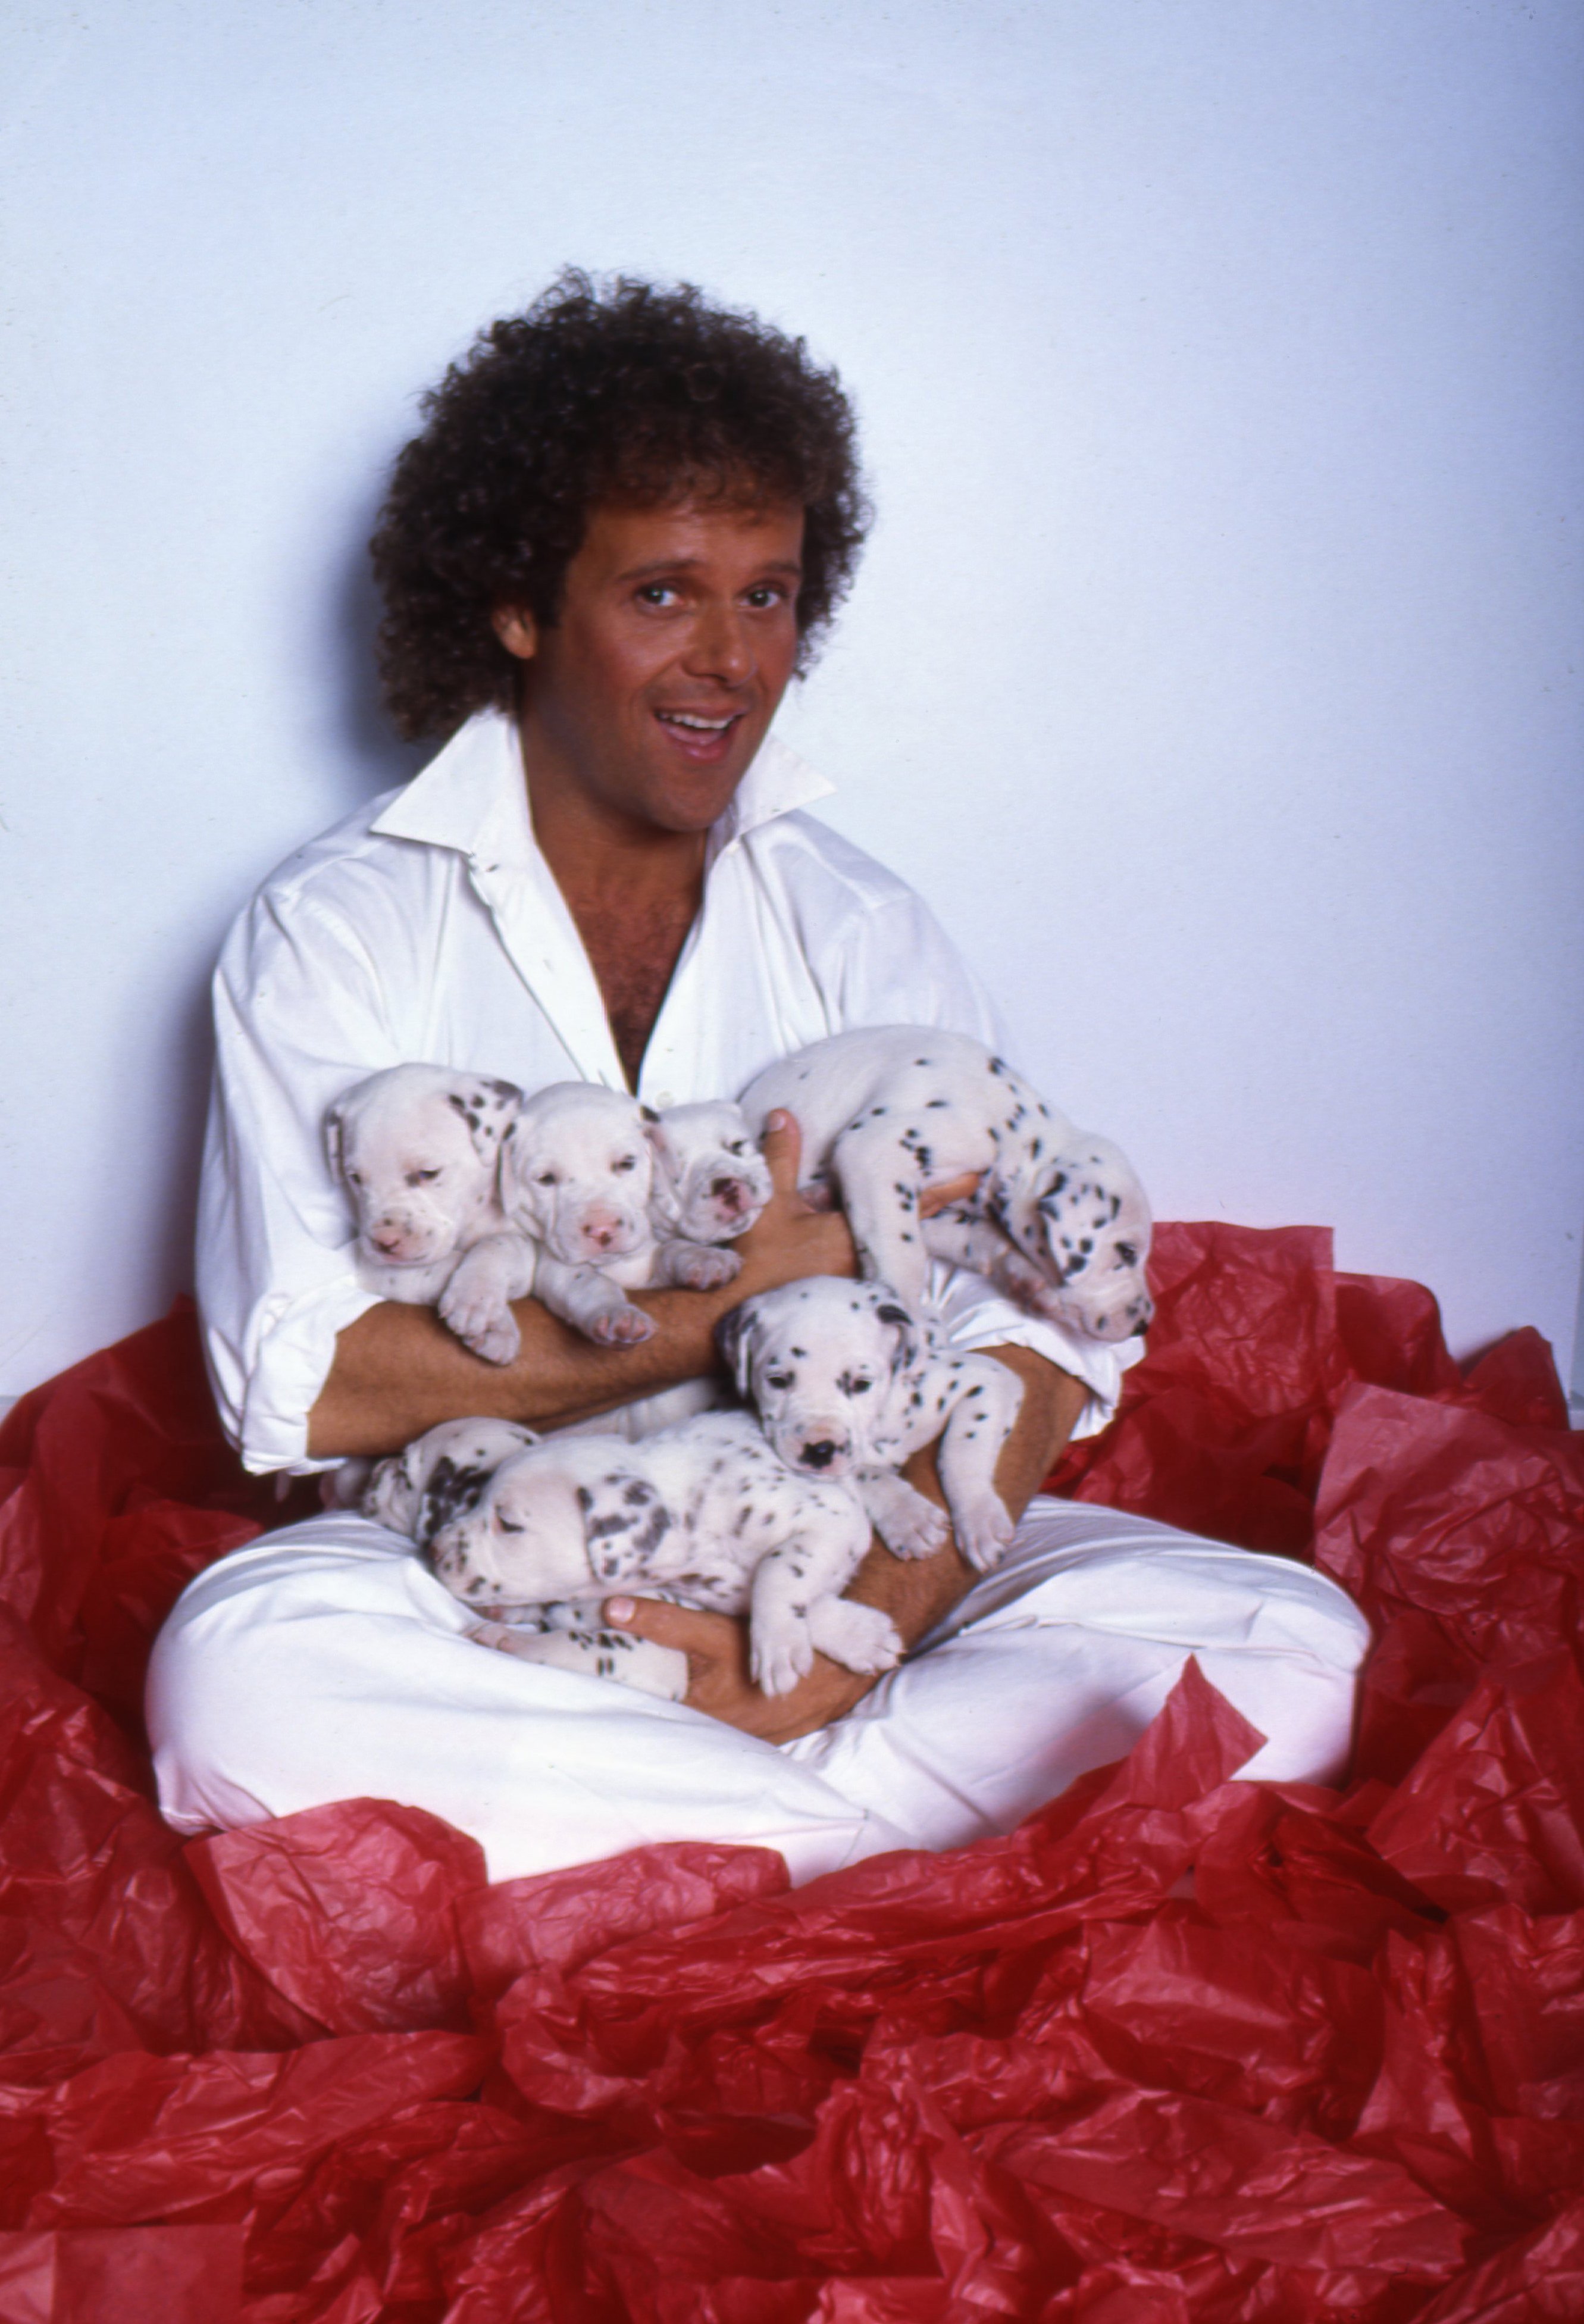 Richard Simmons poses for a portrait with Dalmatian puppies on July 2, 1985, in Los Angeles, California | Source: Getty Images